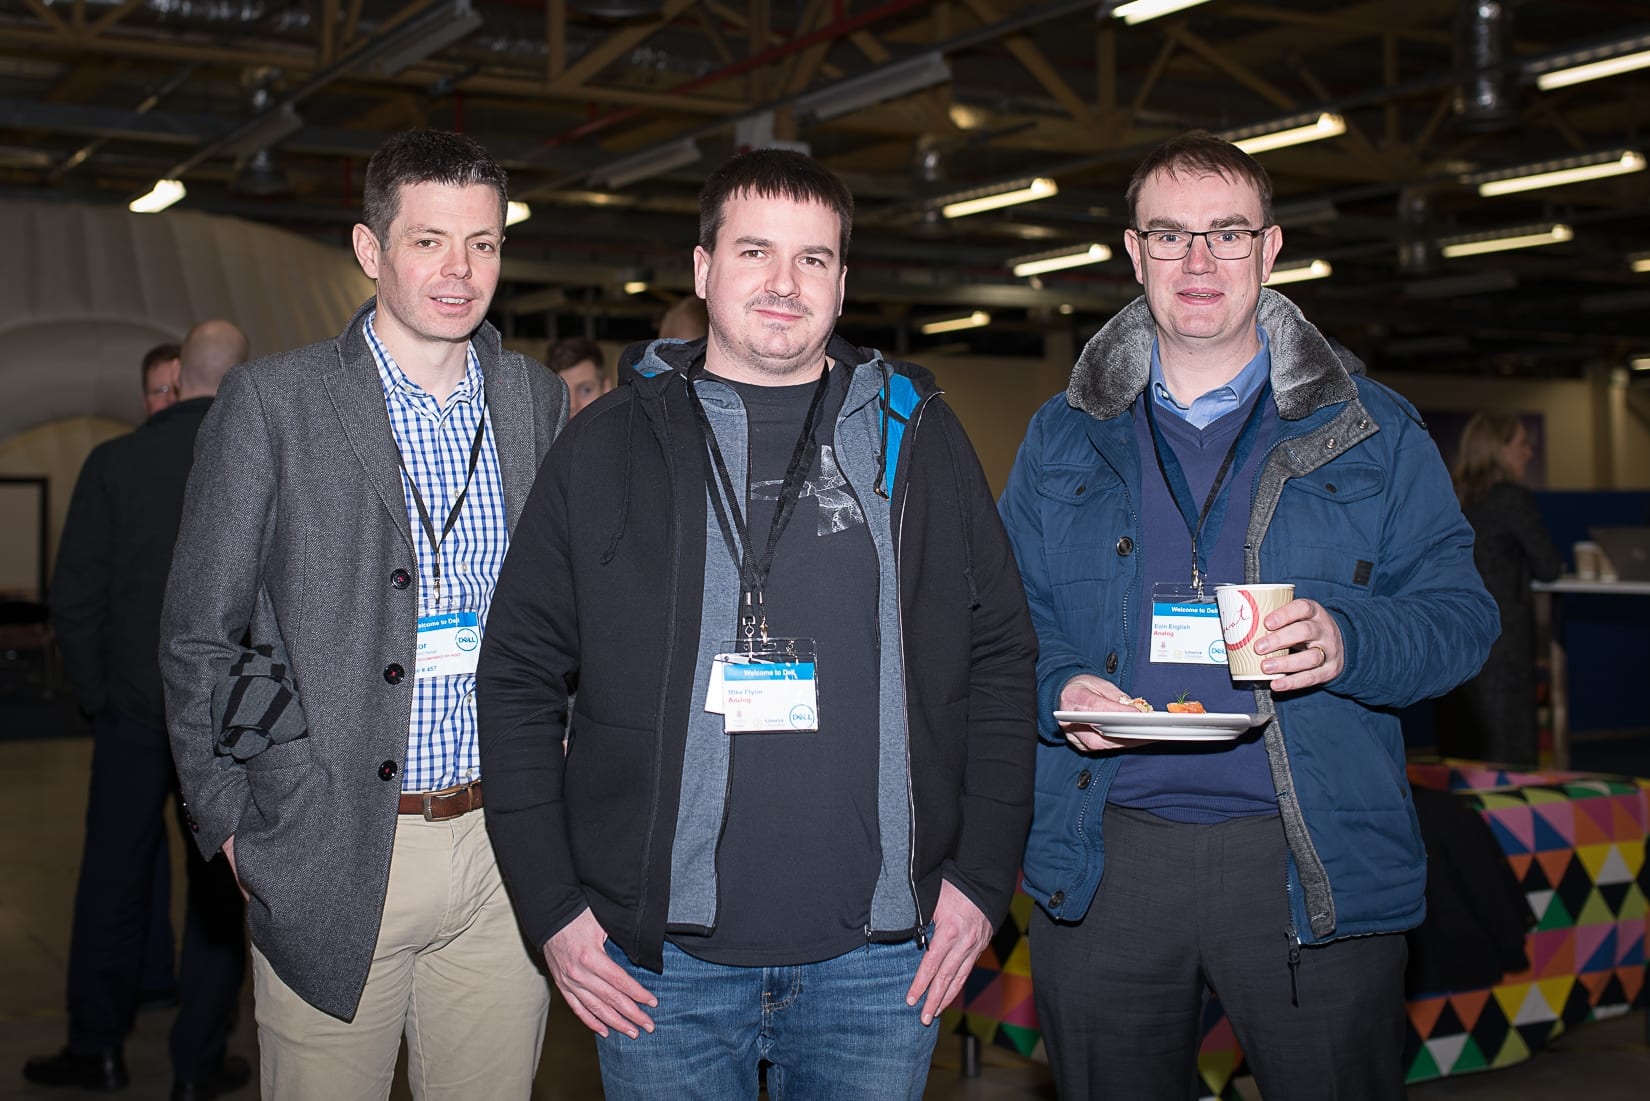 At the Limerick Chamber Regional Leaders programme in Dell, sponsored by Dell EMC, in association with Kemmy Business School UL, was From left to right: Maurice Moroney , Michael Flynn and Eoin English all from Analog Devices.